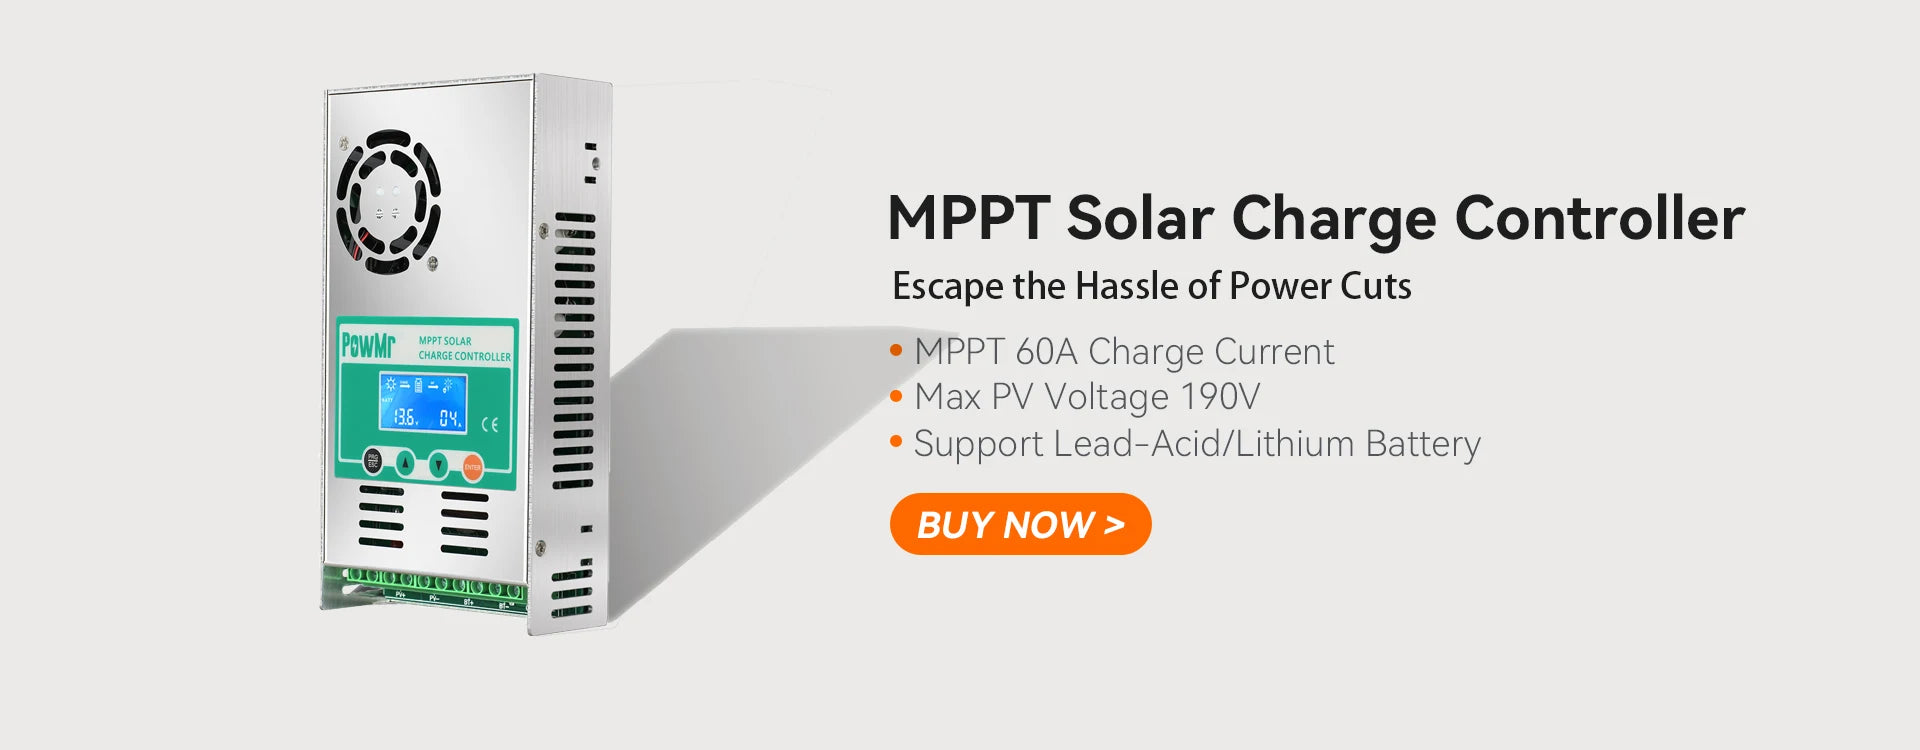 MPPT charge controller for solar power, supporting lead-acid and lithium batteries, with high-current charging.